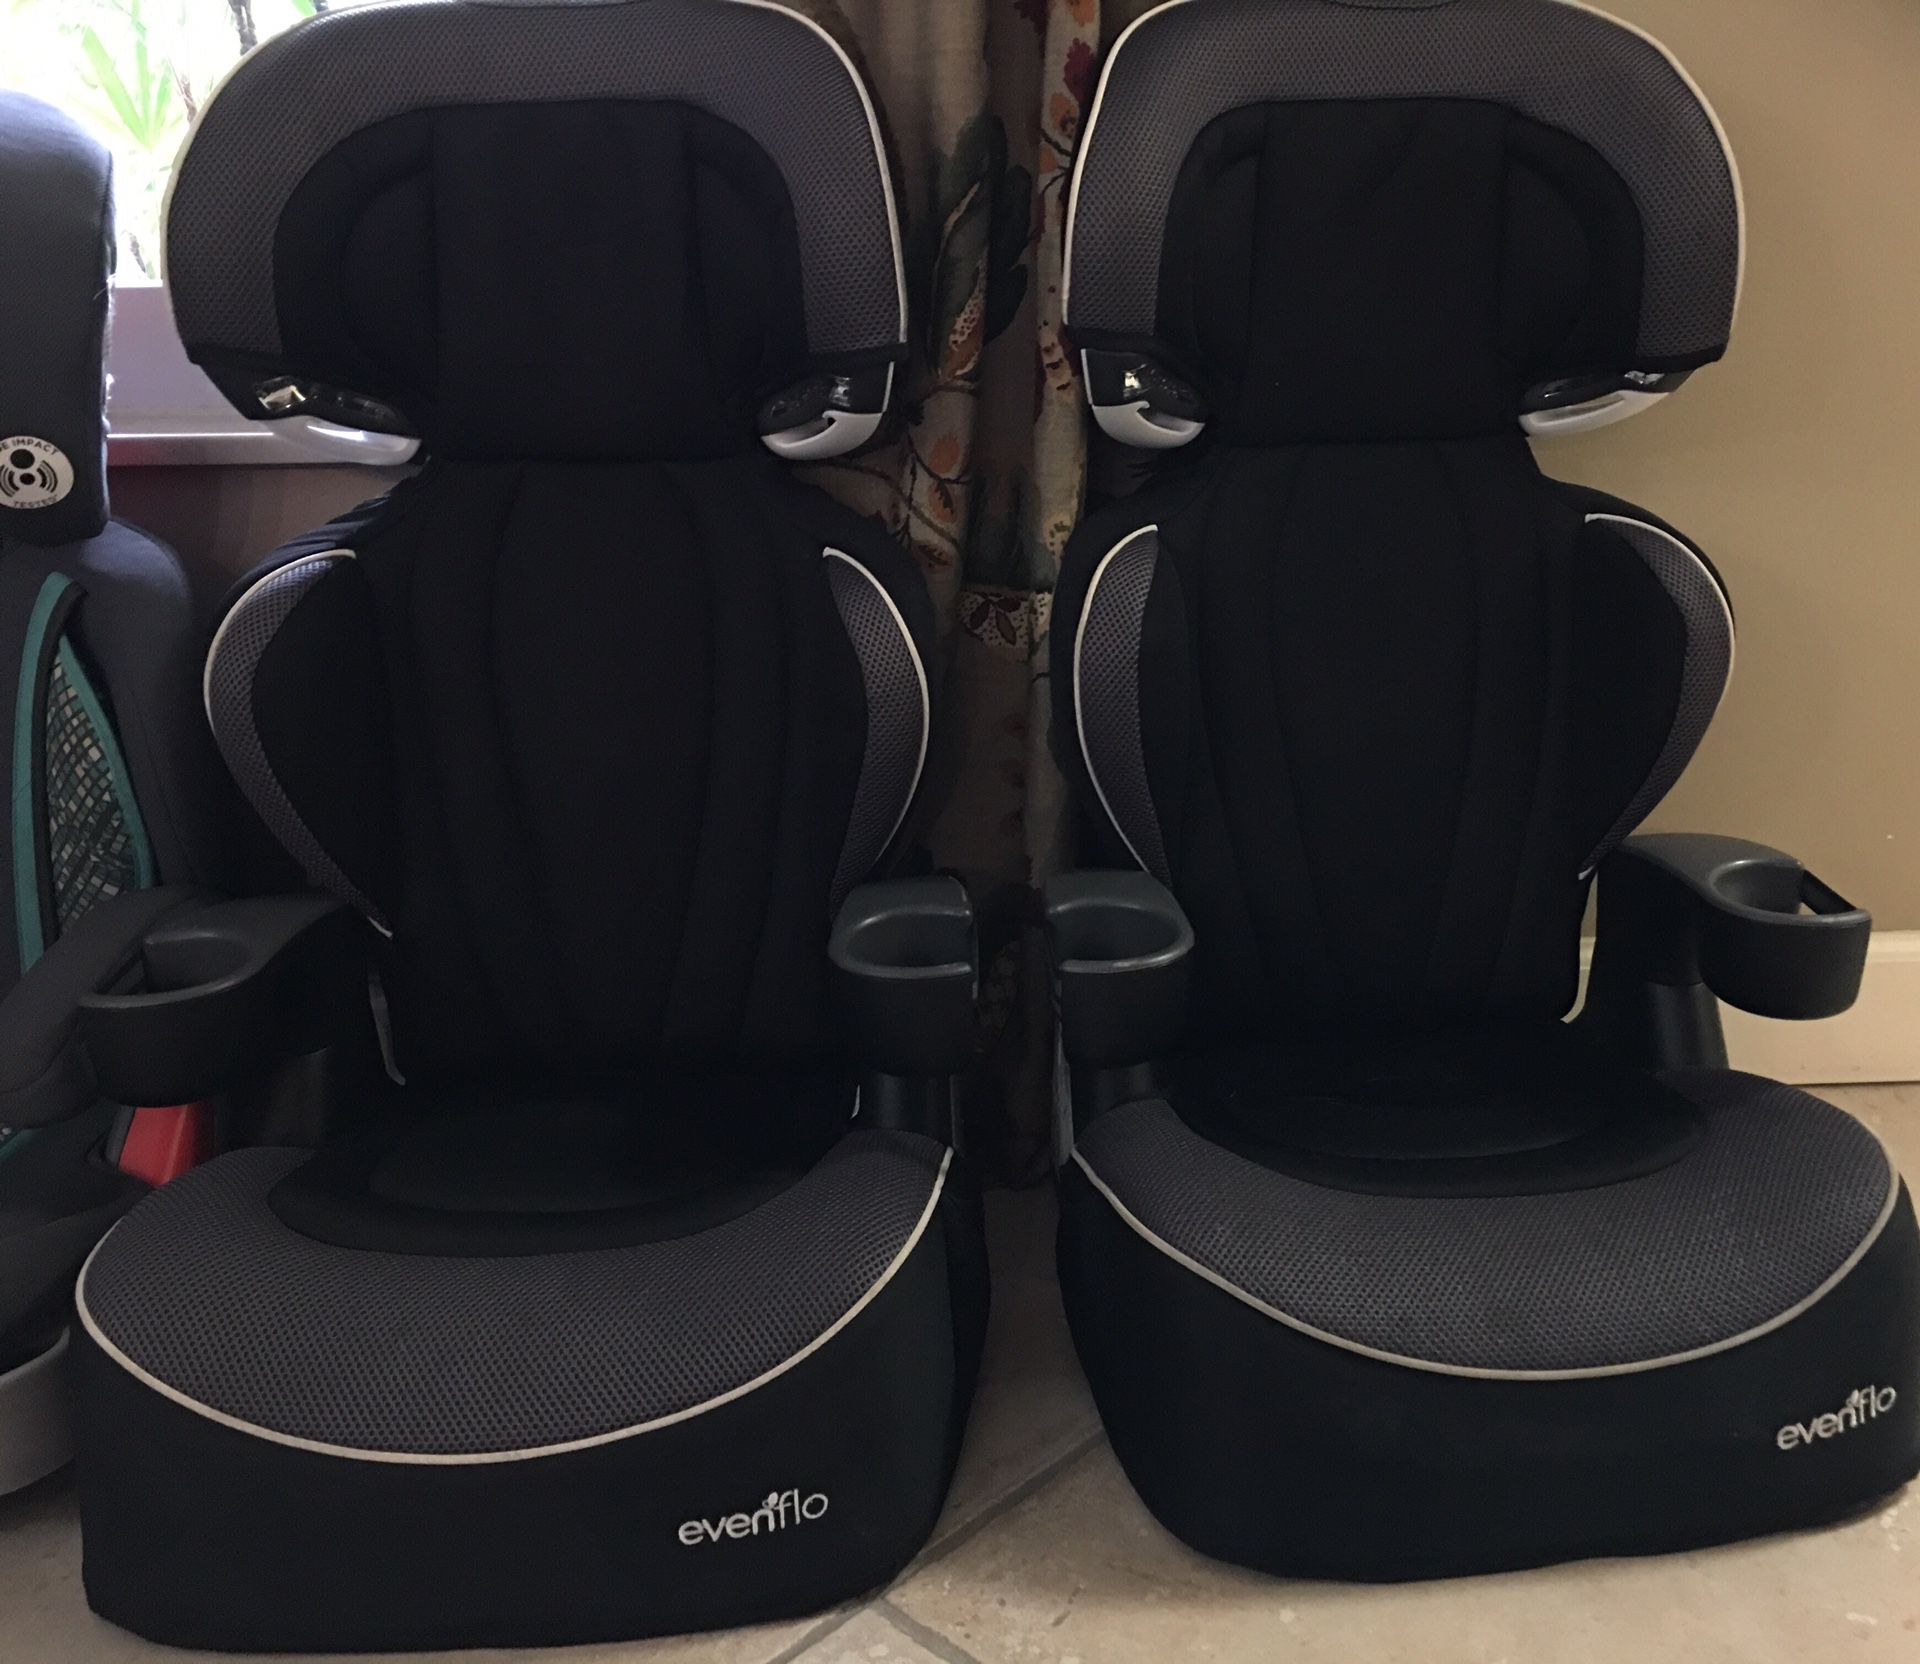 Evenflo booster seat with lights -- two matching